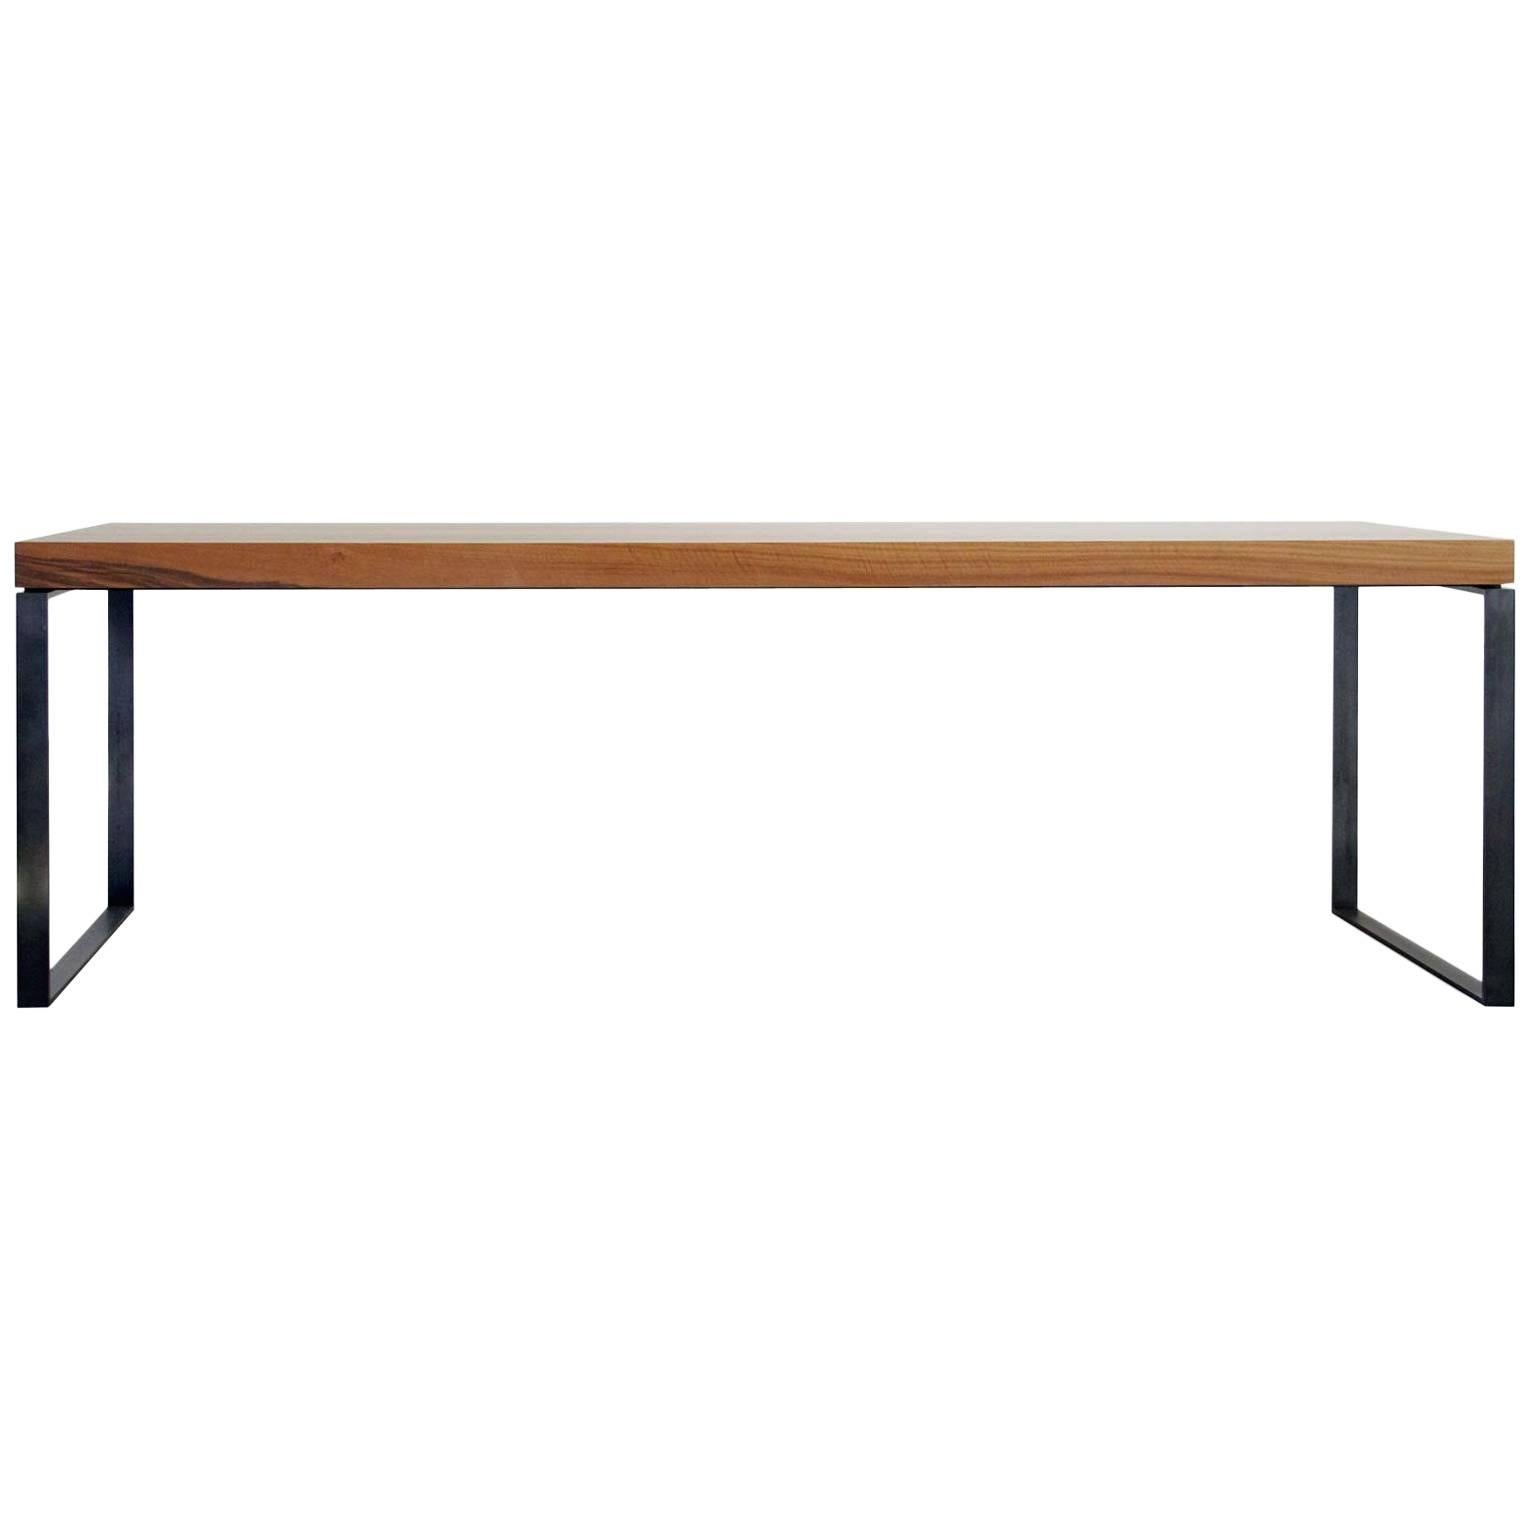 "Brown" Wooden Top and Metal Base Table Designed by Stephane Lebrun for Dessie' For Sale